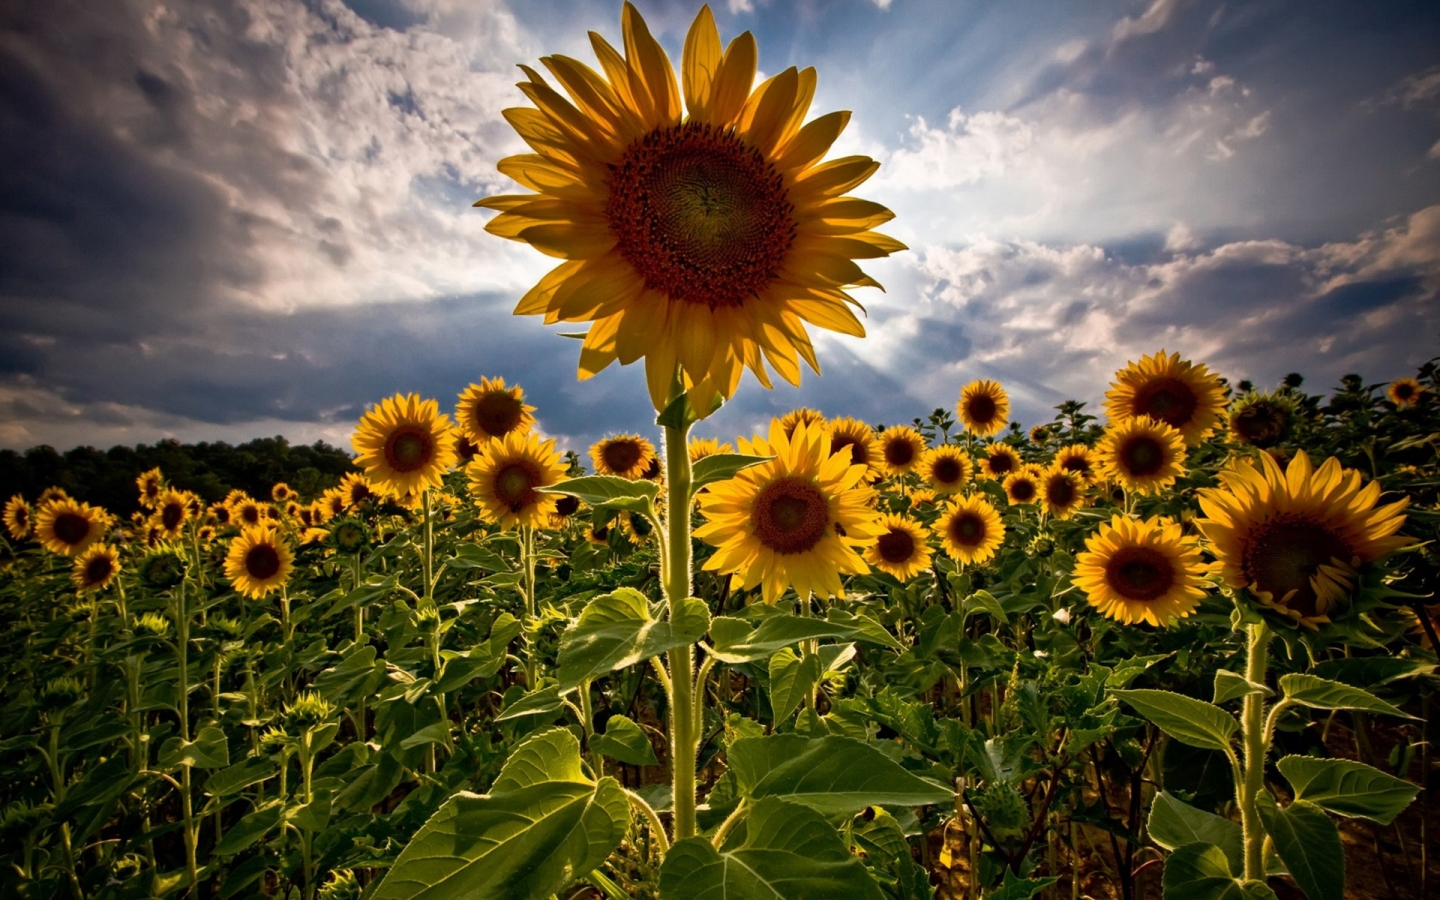 HDR Sunflower for 1440 x 900 widescreen resolution